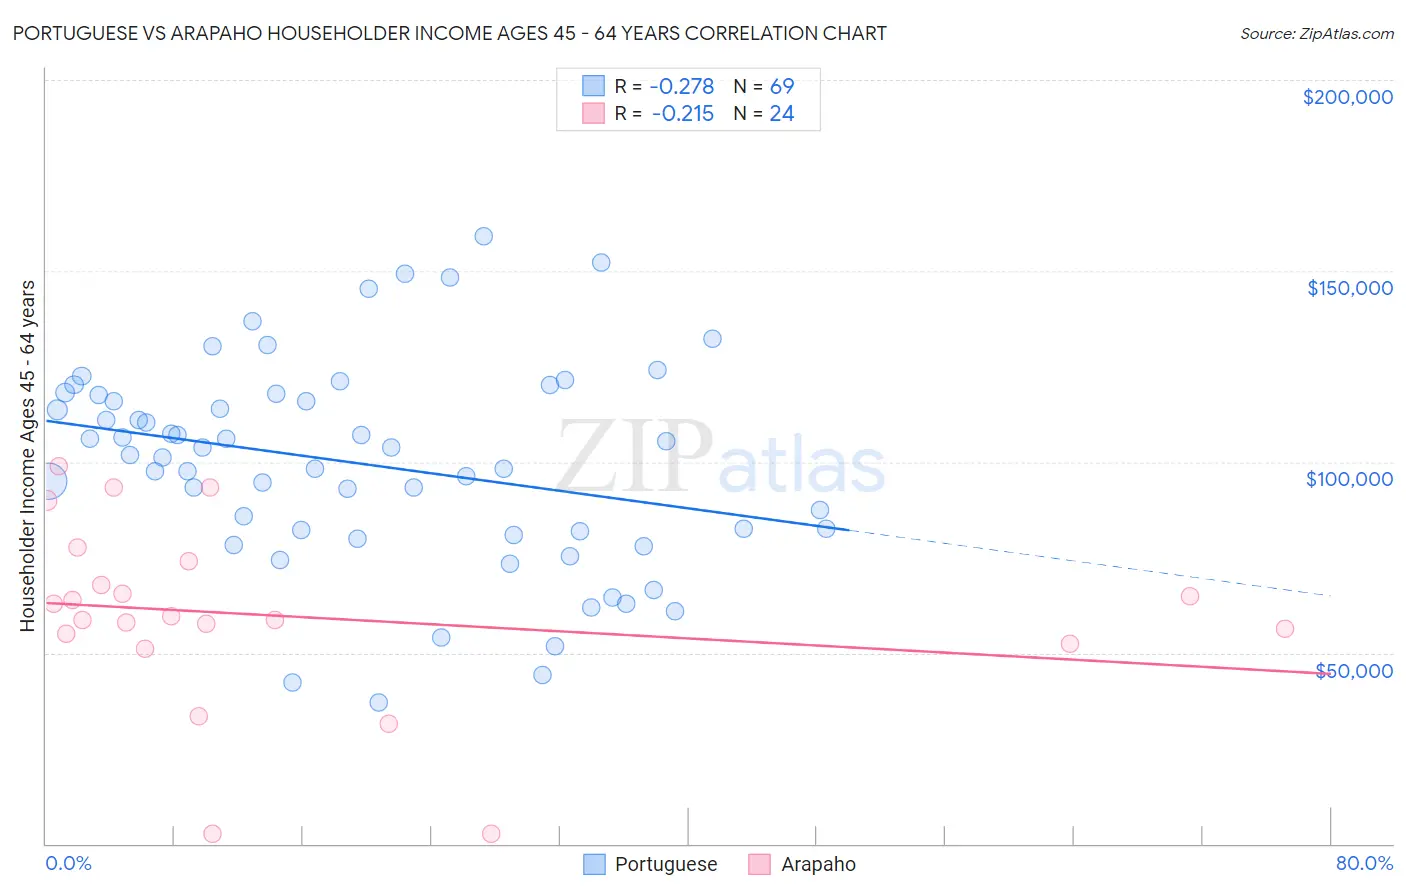 Portuguese vs Arapaho Householder Income Ages 45 - 64 years